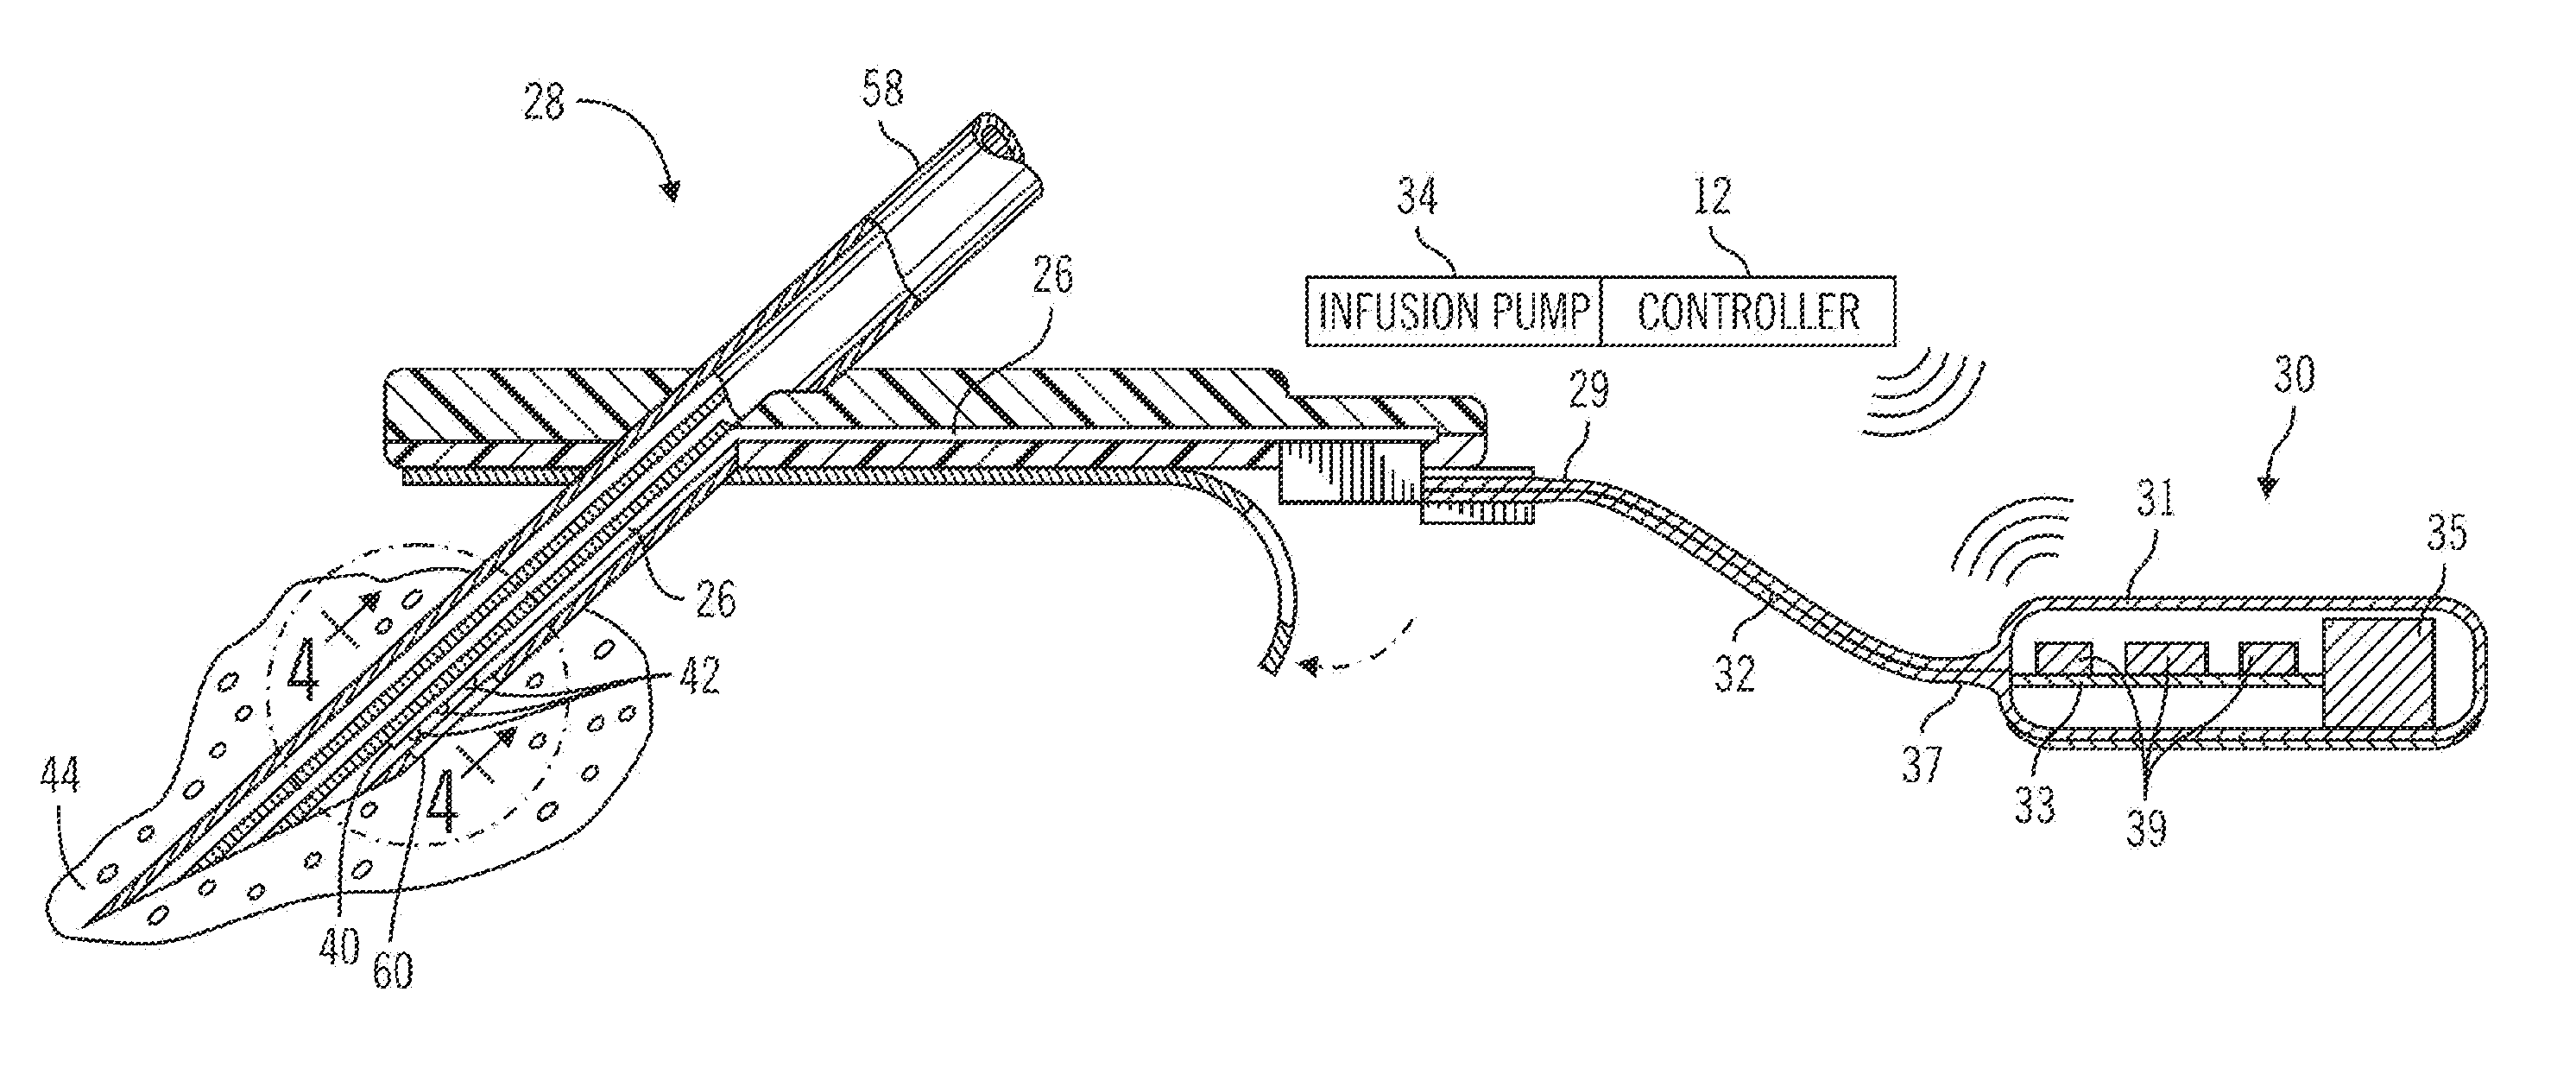 Sensor model supervisor for a closed-loop insulin infusion system